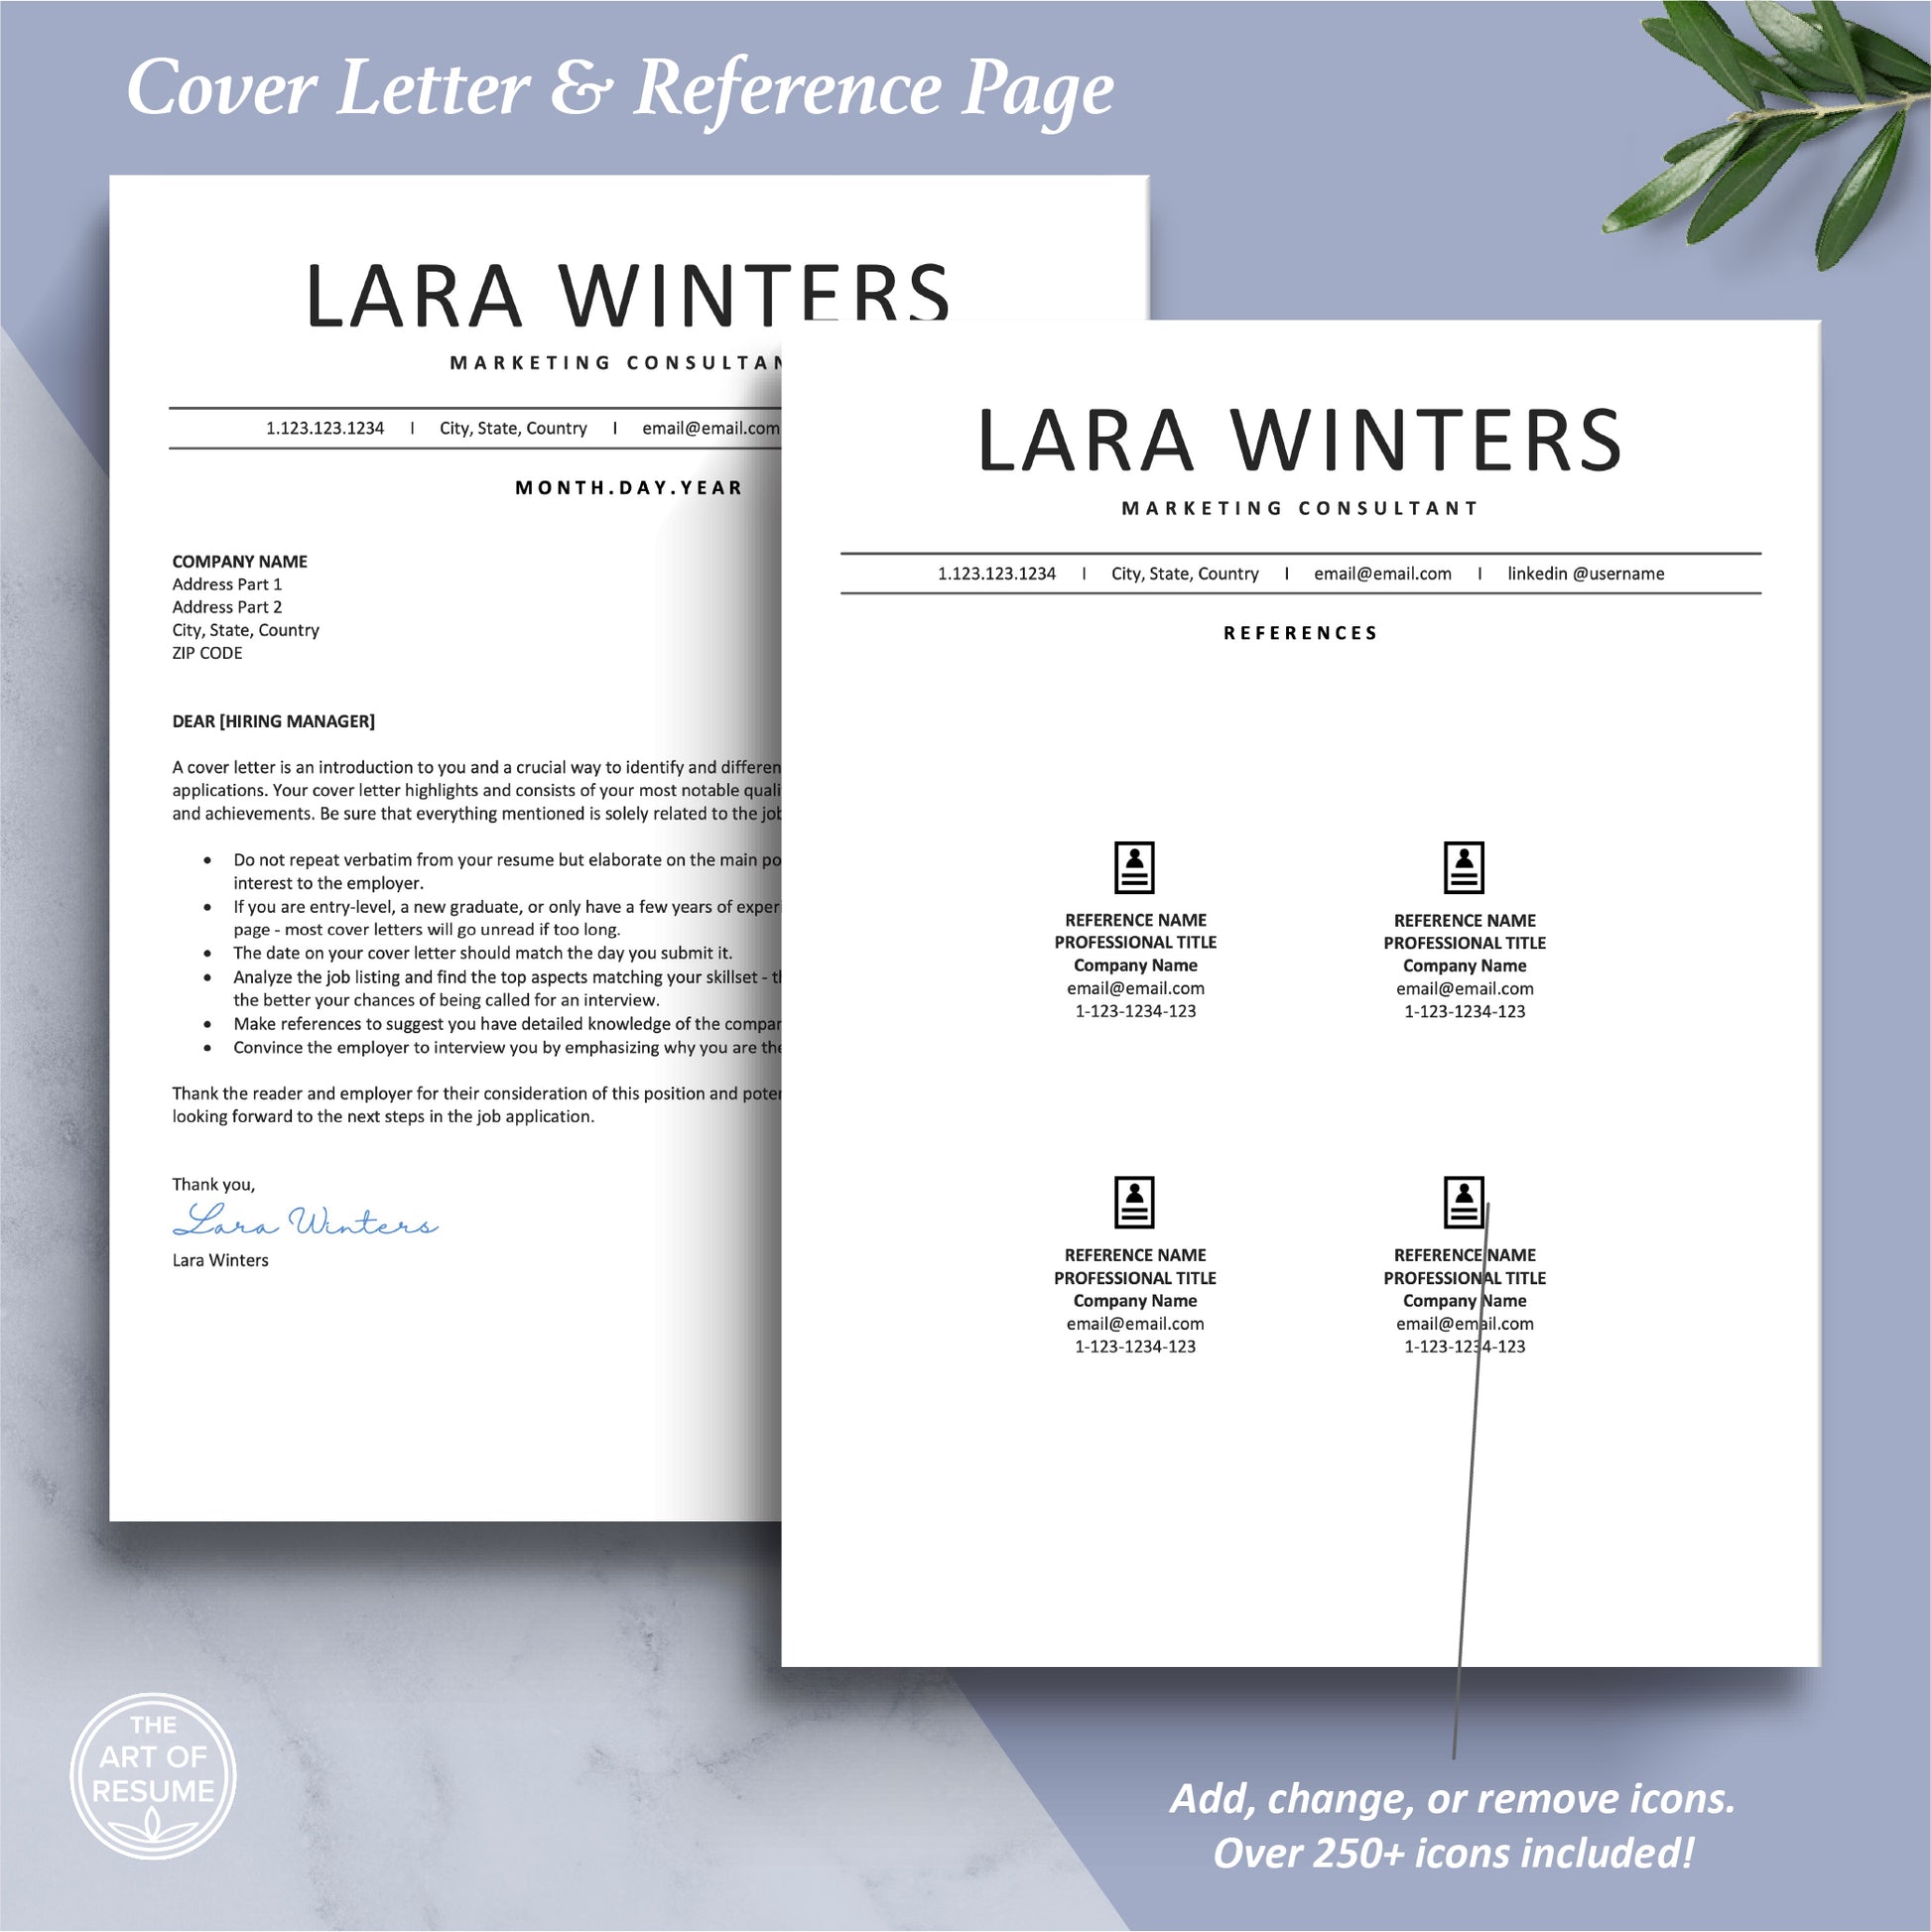 The Art of Resume Templates |  Professional Simple Letter and Reference Page Design Templates Instant Download